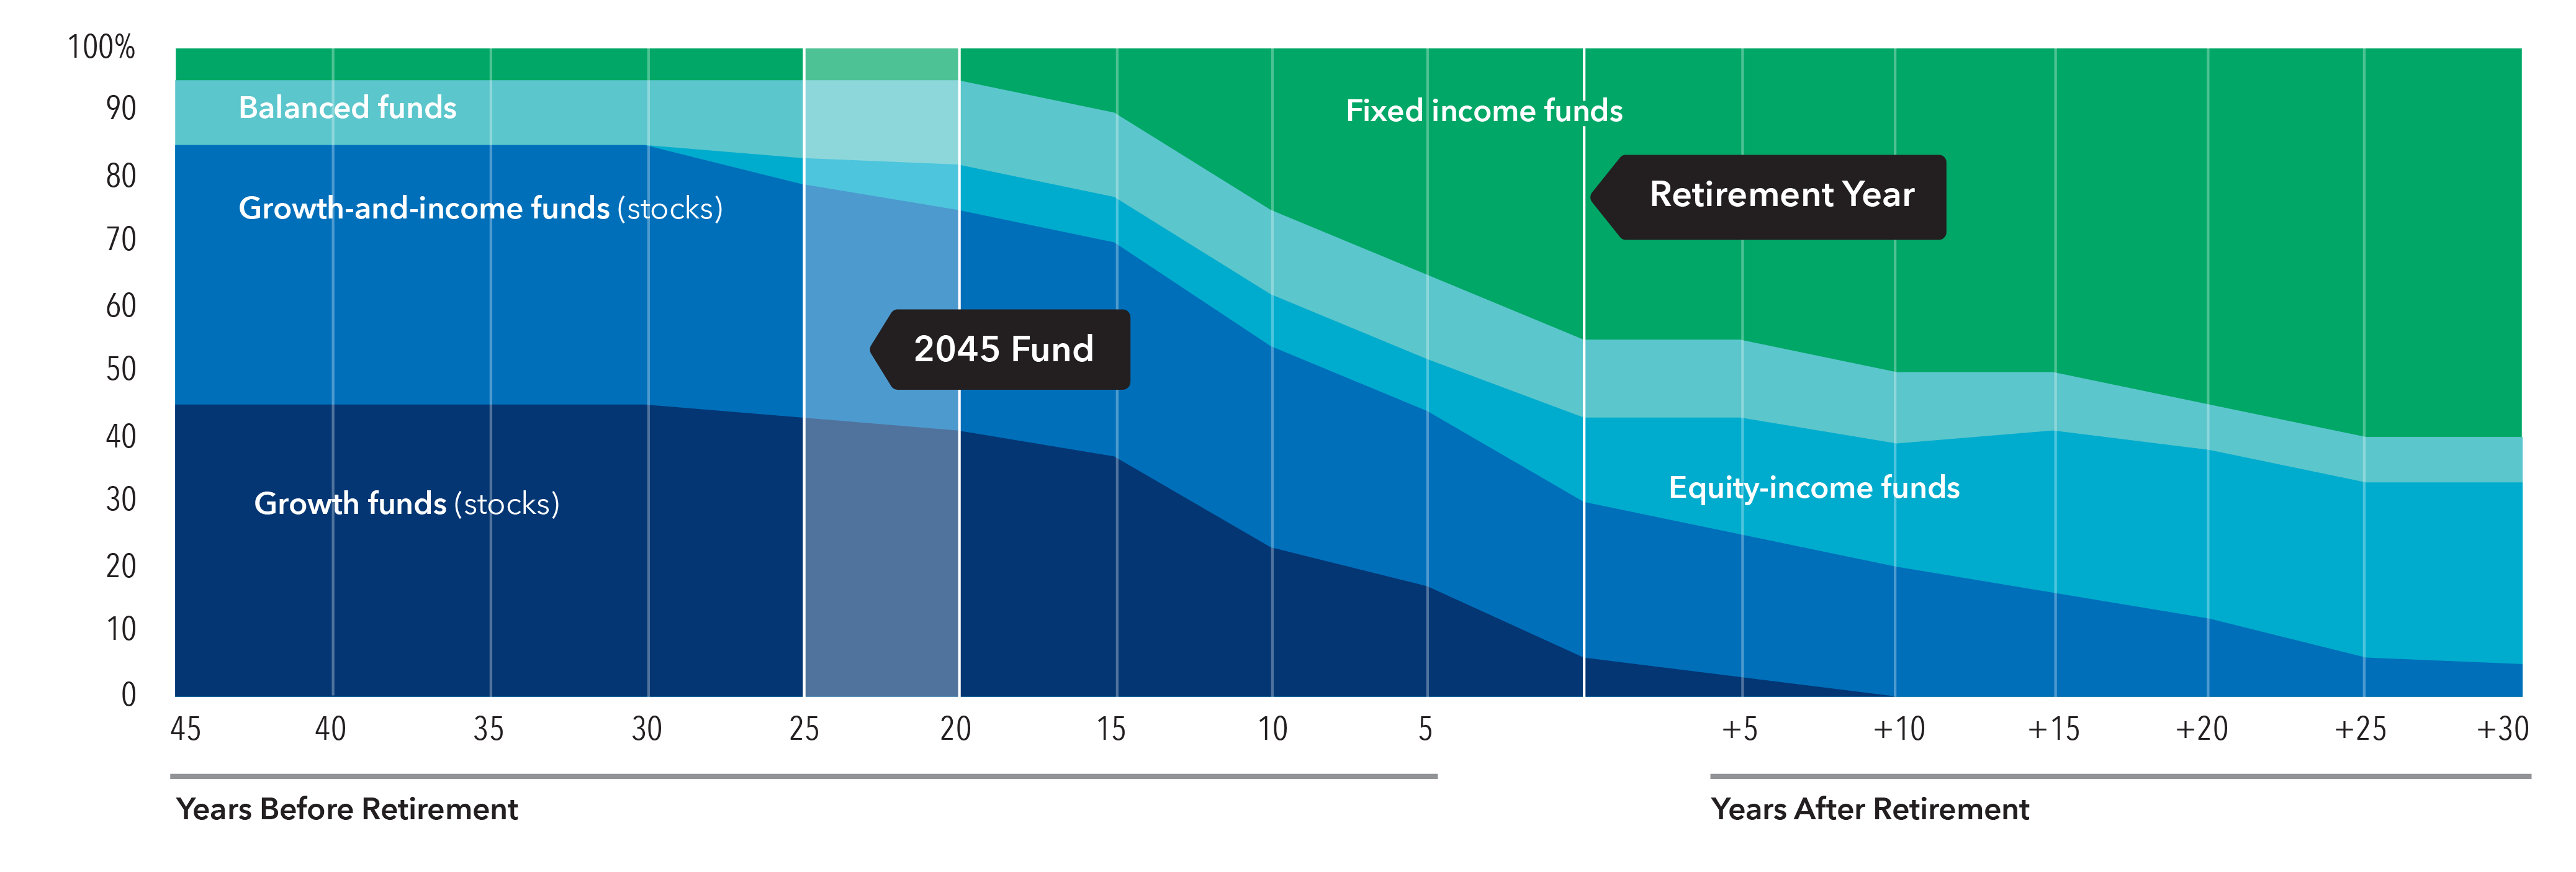 This layer chart shows the glide path — the allocation of the mix of underlying funds over time — from age 20 to age 95. The five categories of underlying funds are: growth funds, growth-and-income funds, equity-income funds, balanced funds and fixed income funds. The chart shows that at age 20, the greatest allocation is to growth and growth-and-income funds (together, consisting of 85% of total assets), followed by balanced funds (10%) and fixed income funds (5%). As investors age and approach retirement, the allocation to growth and growth-and-income funds declines, and the allocations to equity-income funds, balanced funds and fixed-income funds increase. After retirement, the growth and growth-and-income funds continue to decline, while allocations to fixed income grow substantially. At retirement, growth funds have 6% of assets, growth-and-income funds have 24% of assets, equity-income funds have 13% of assets, balanced funds have 12% of assets and fixed income funds have 45%. The allocation to equity-income funds also grows gradually over the course of retirement. At age 95, there are no allocations to growth funds. Growth-and-income funds have 5% of assets, equity-income funds have 28% of assets, balanced funds have 7% of assets and fixed income funds have 60% of assets.